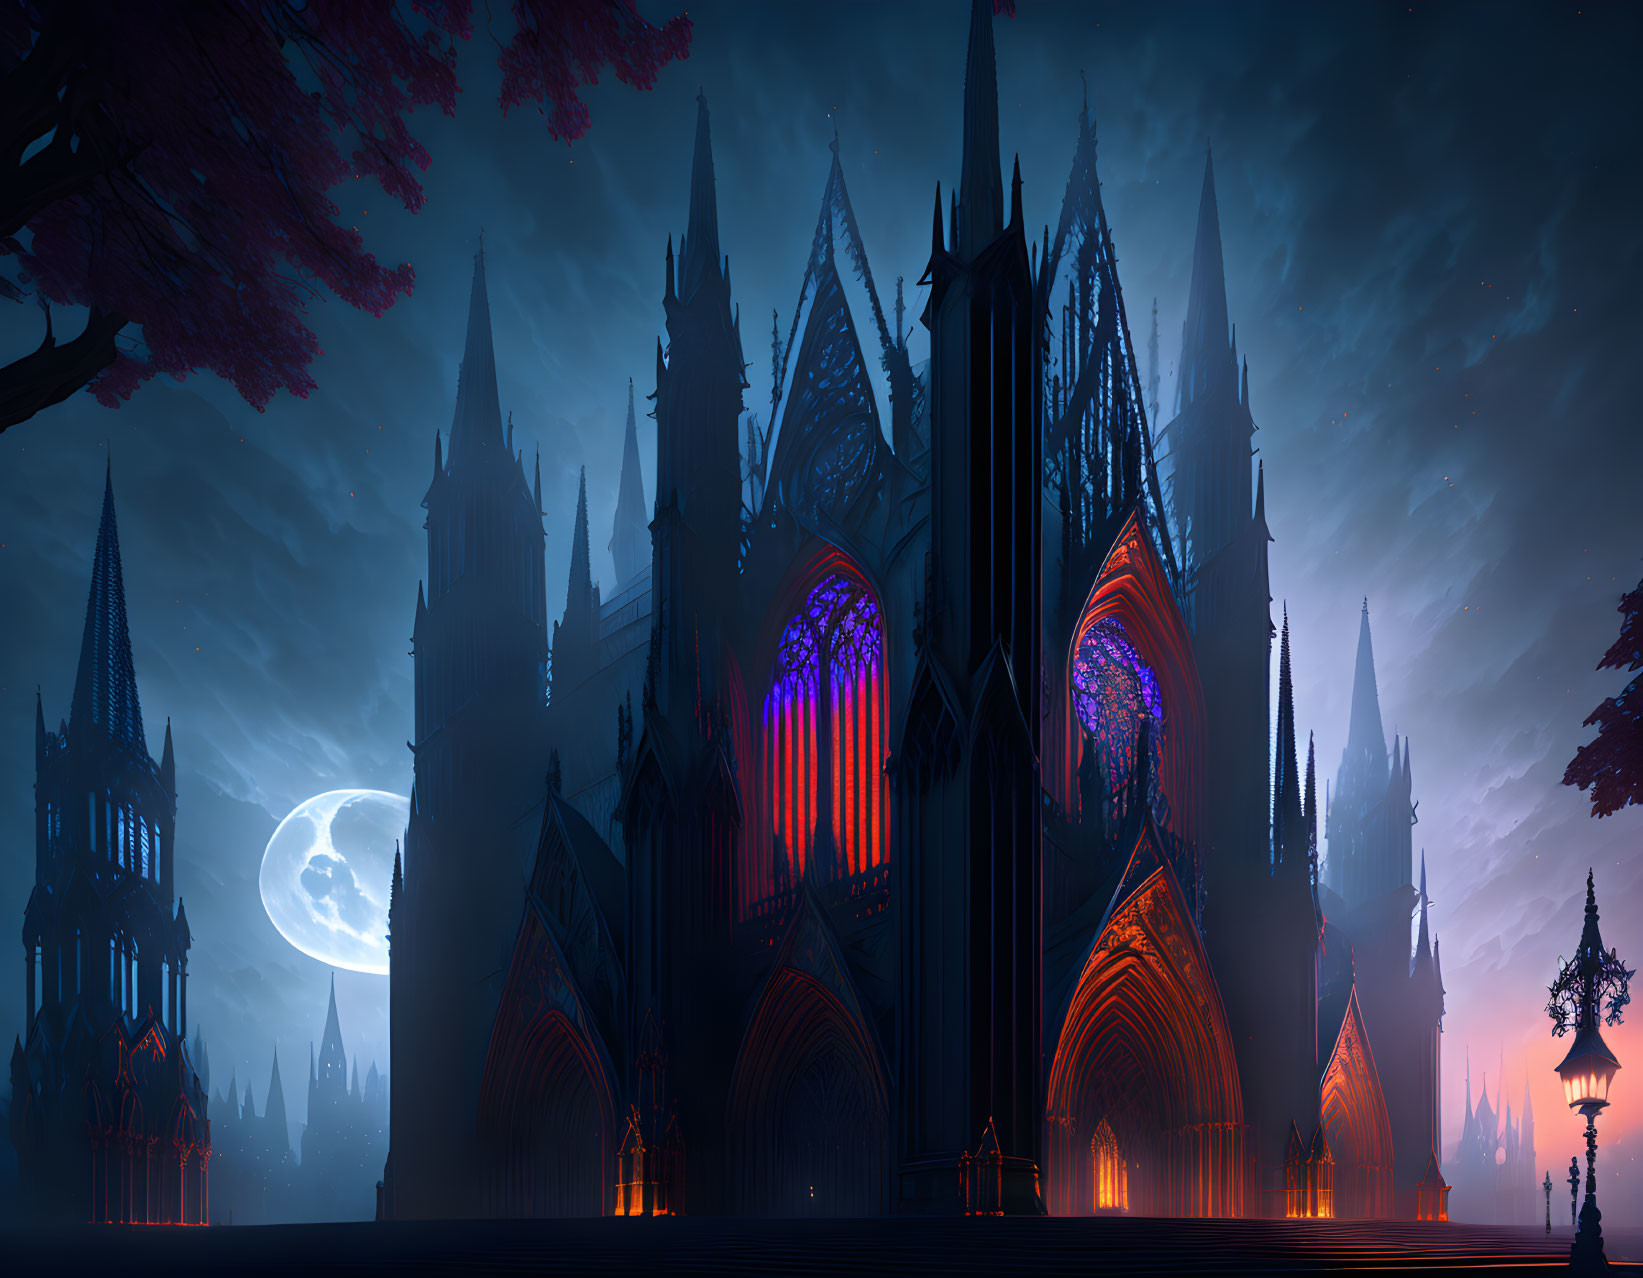 Gothic Cathedral Night Scene with Stained Glass Windows & Full Moon